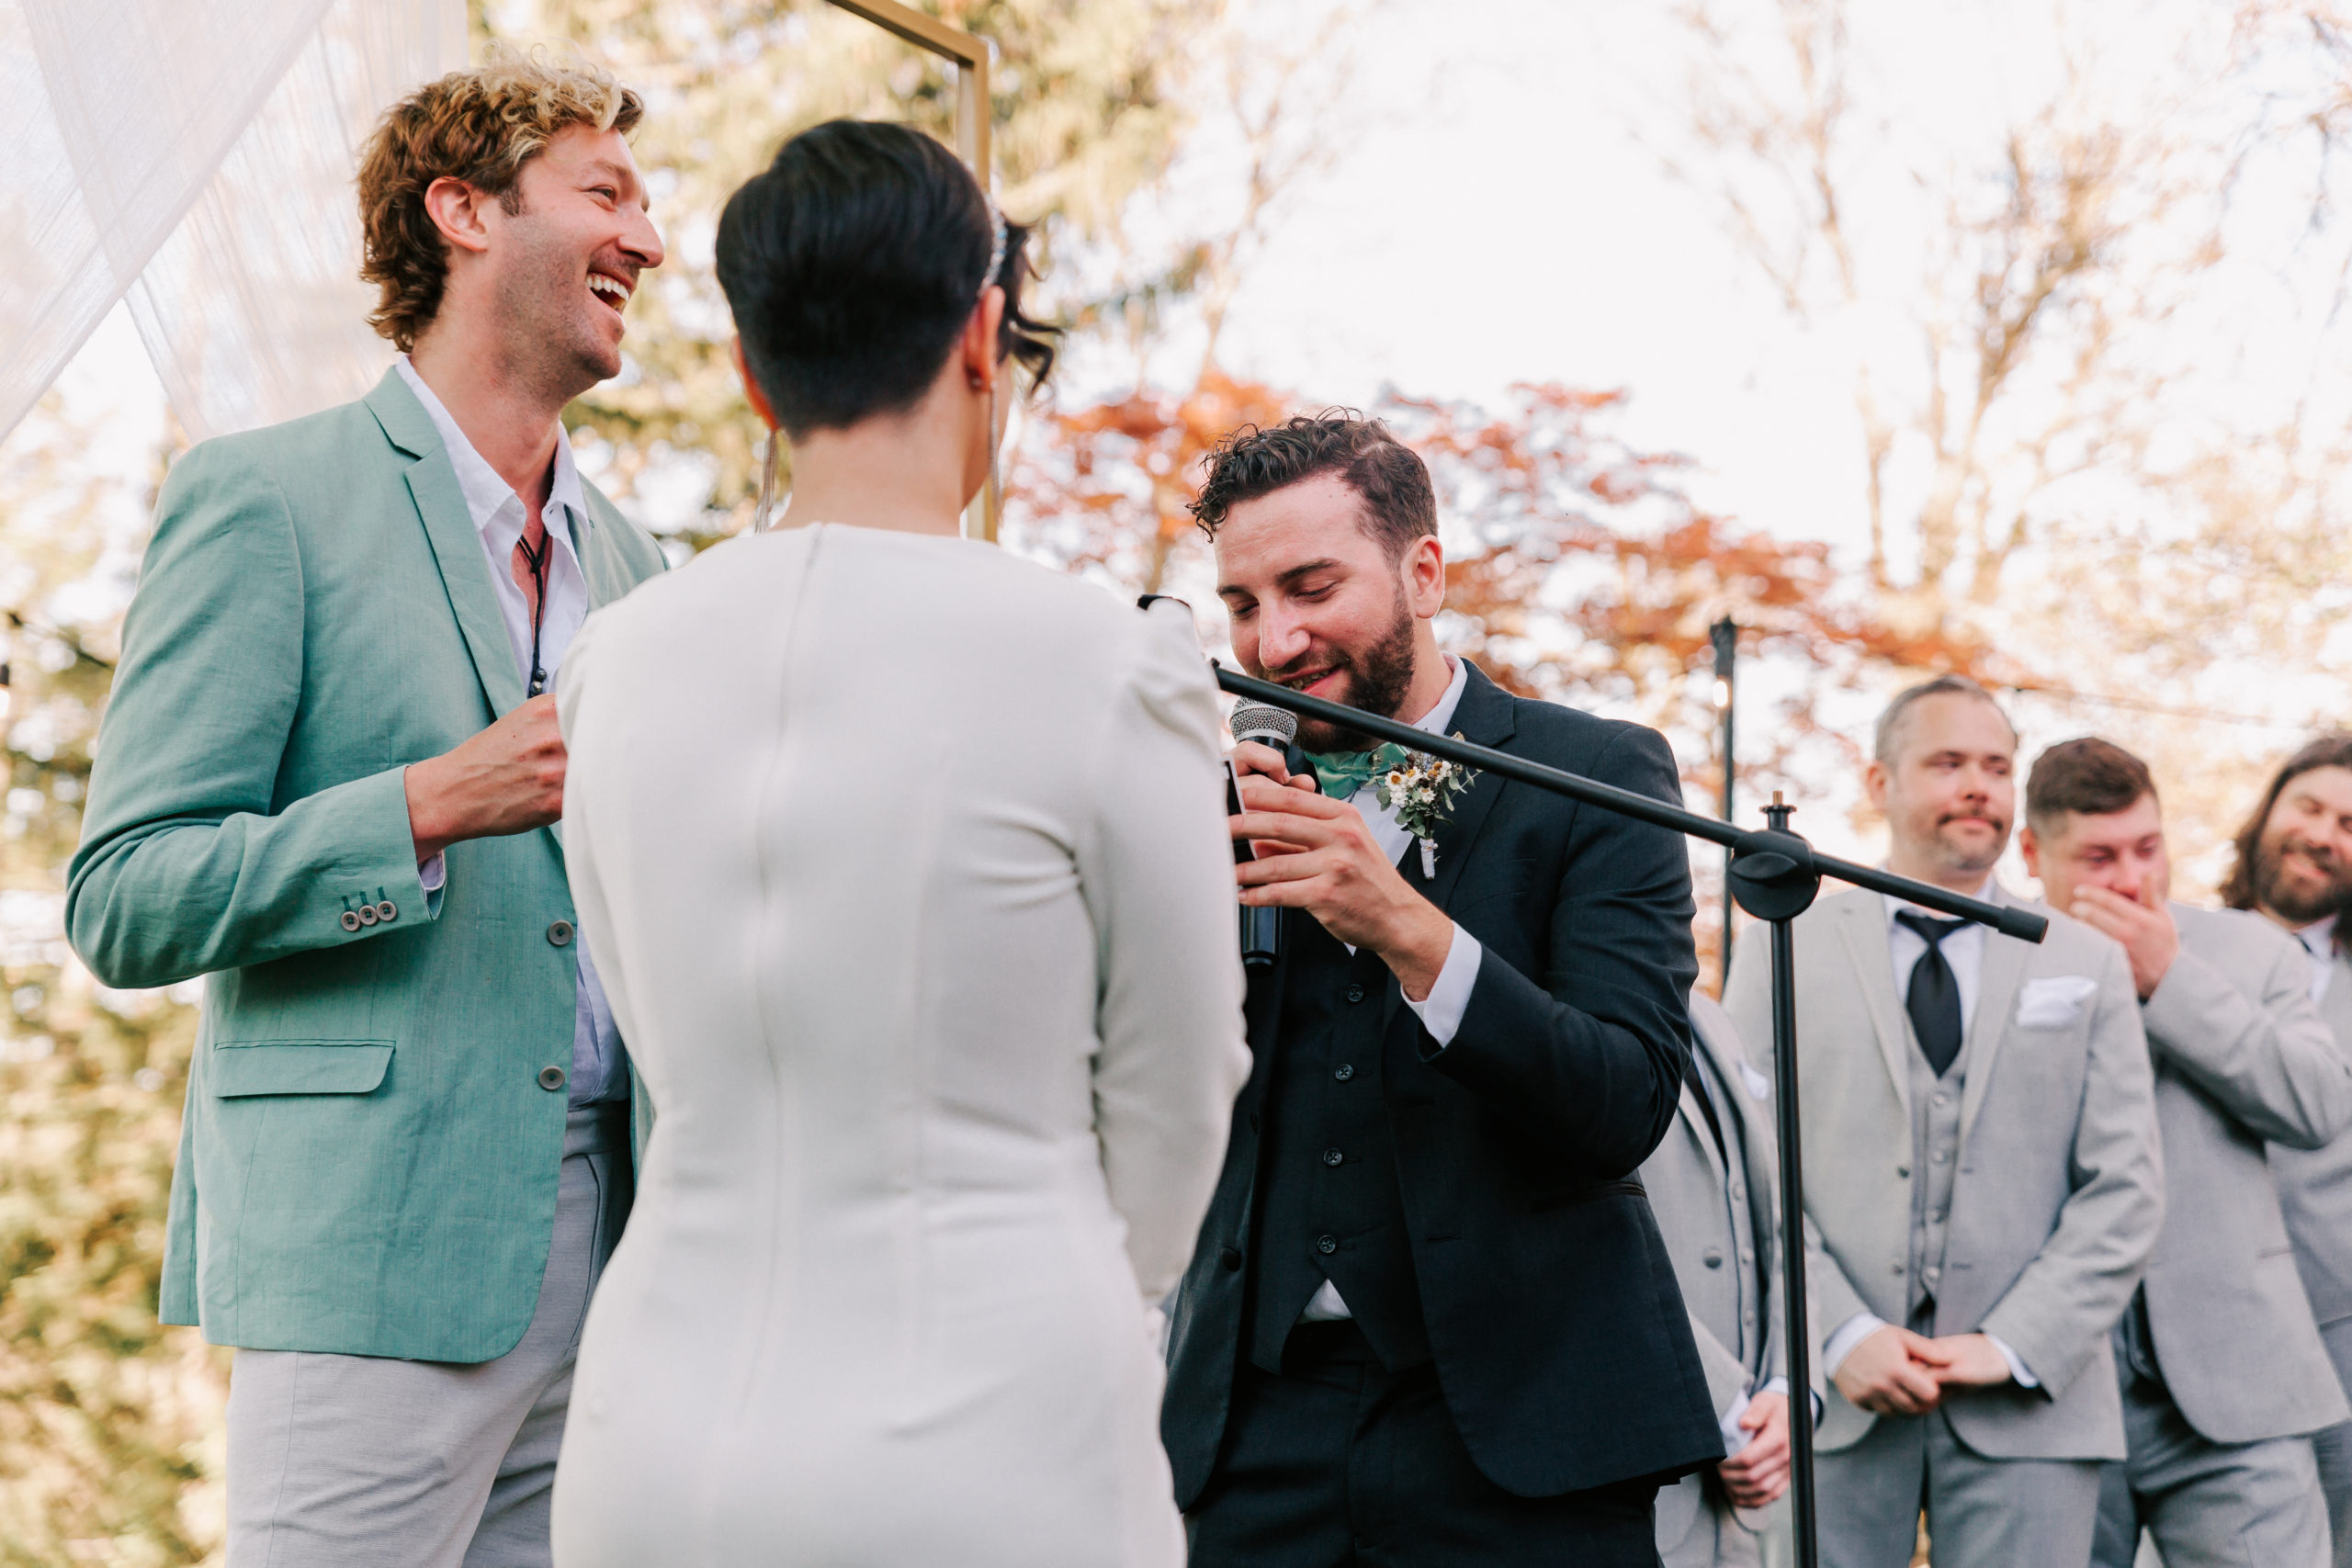 a wedding ceremony at one of the most unique wedding venues Massachusetts has to offer